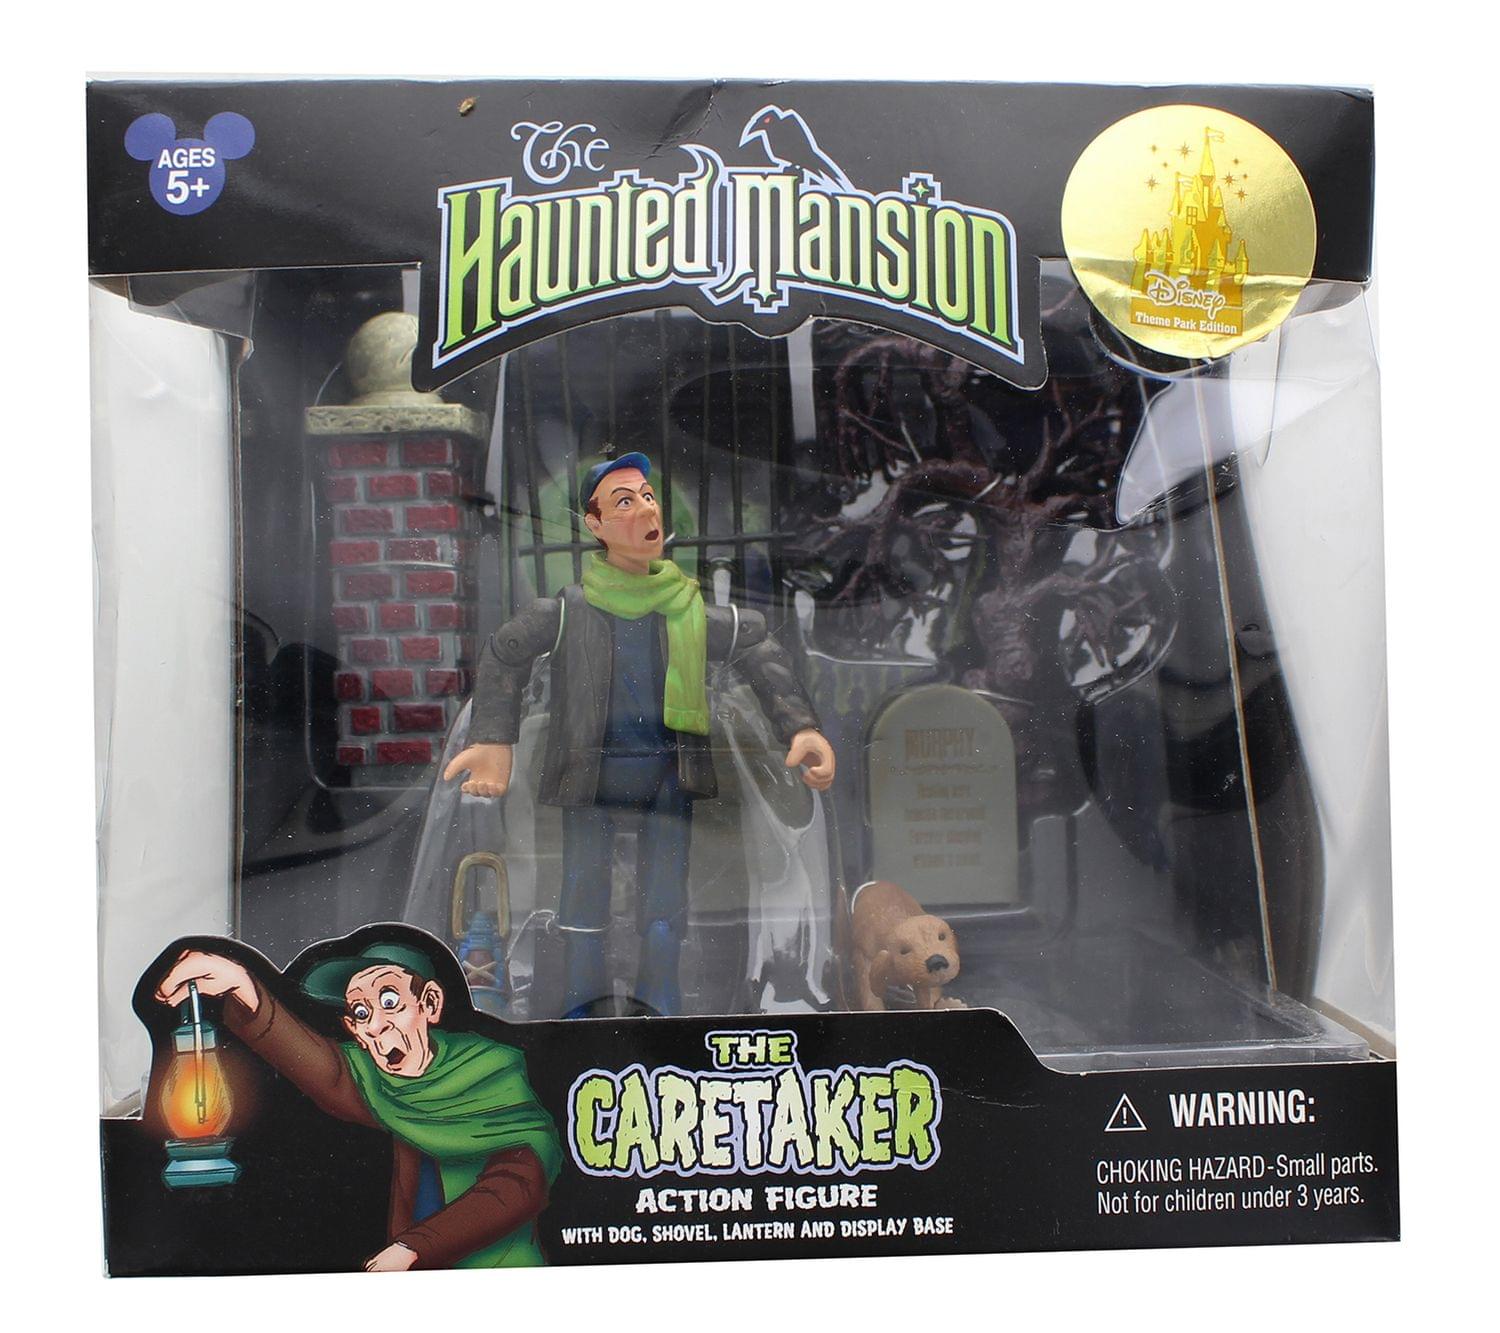 Disney The Haunted Mansion Hitchhiking Ghost Figure Playset - The Caretaker